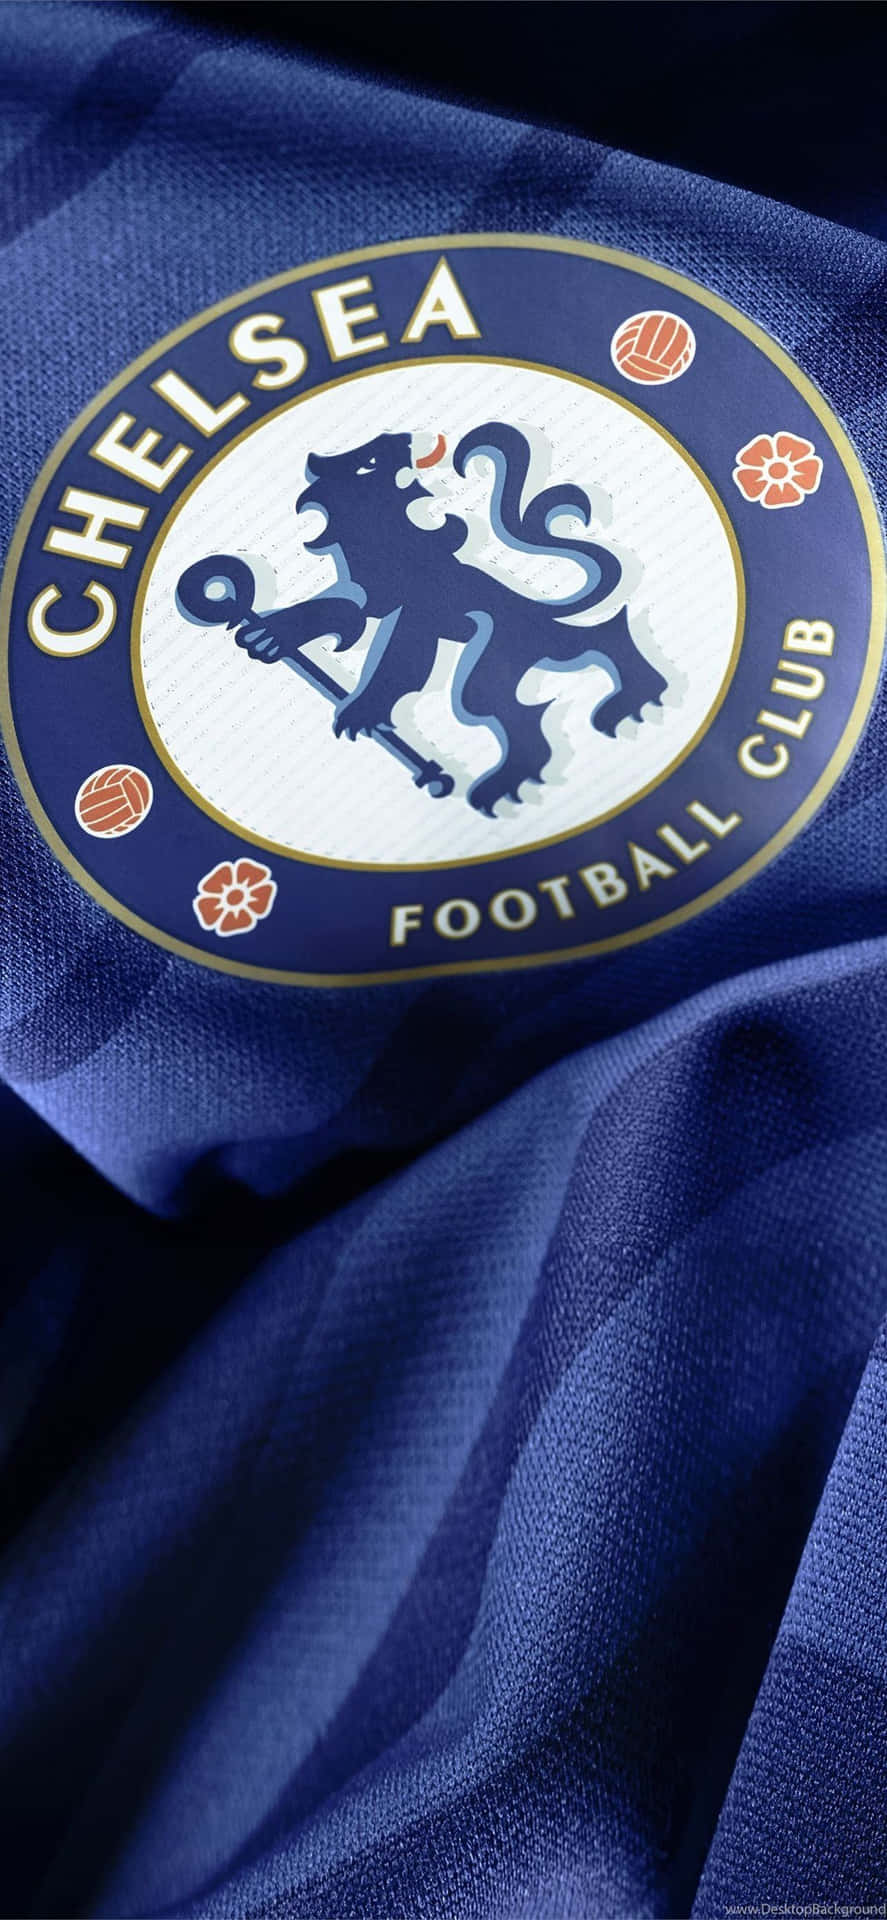 Chelsea F.C. phone wallpaper» 1080P, 2k, 4k Full HD Wallpapers, Backgrounds  Free Download | Wallpaper Crafter